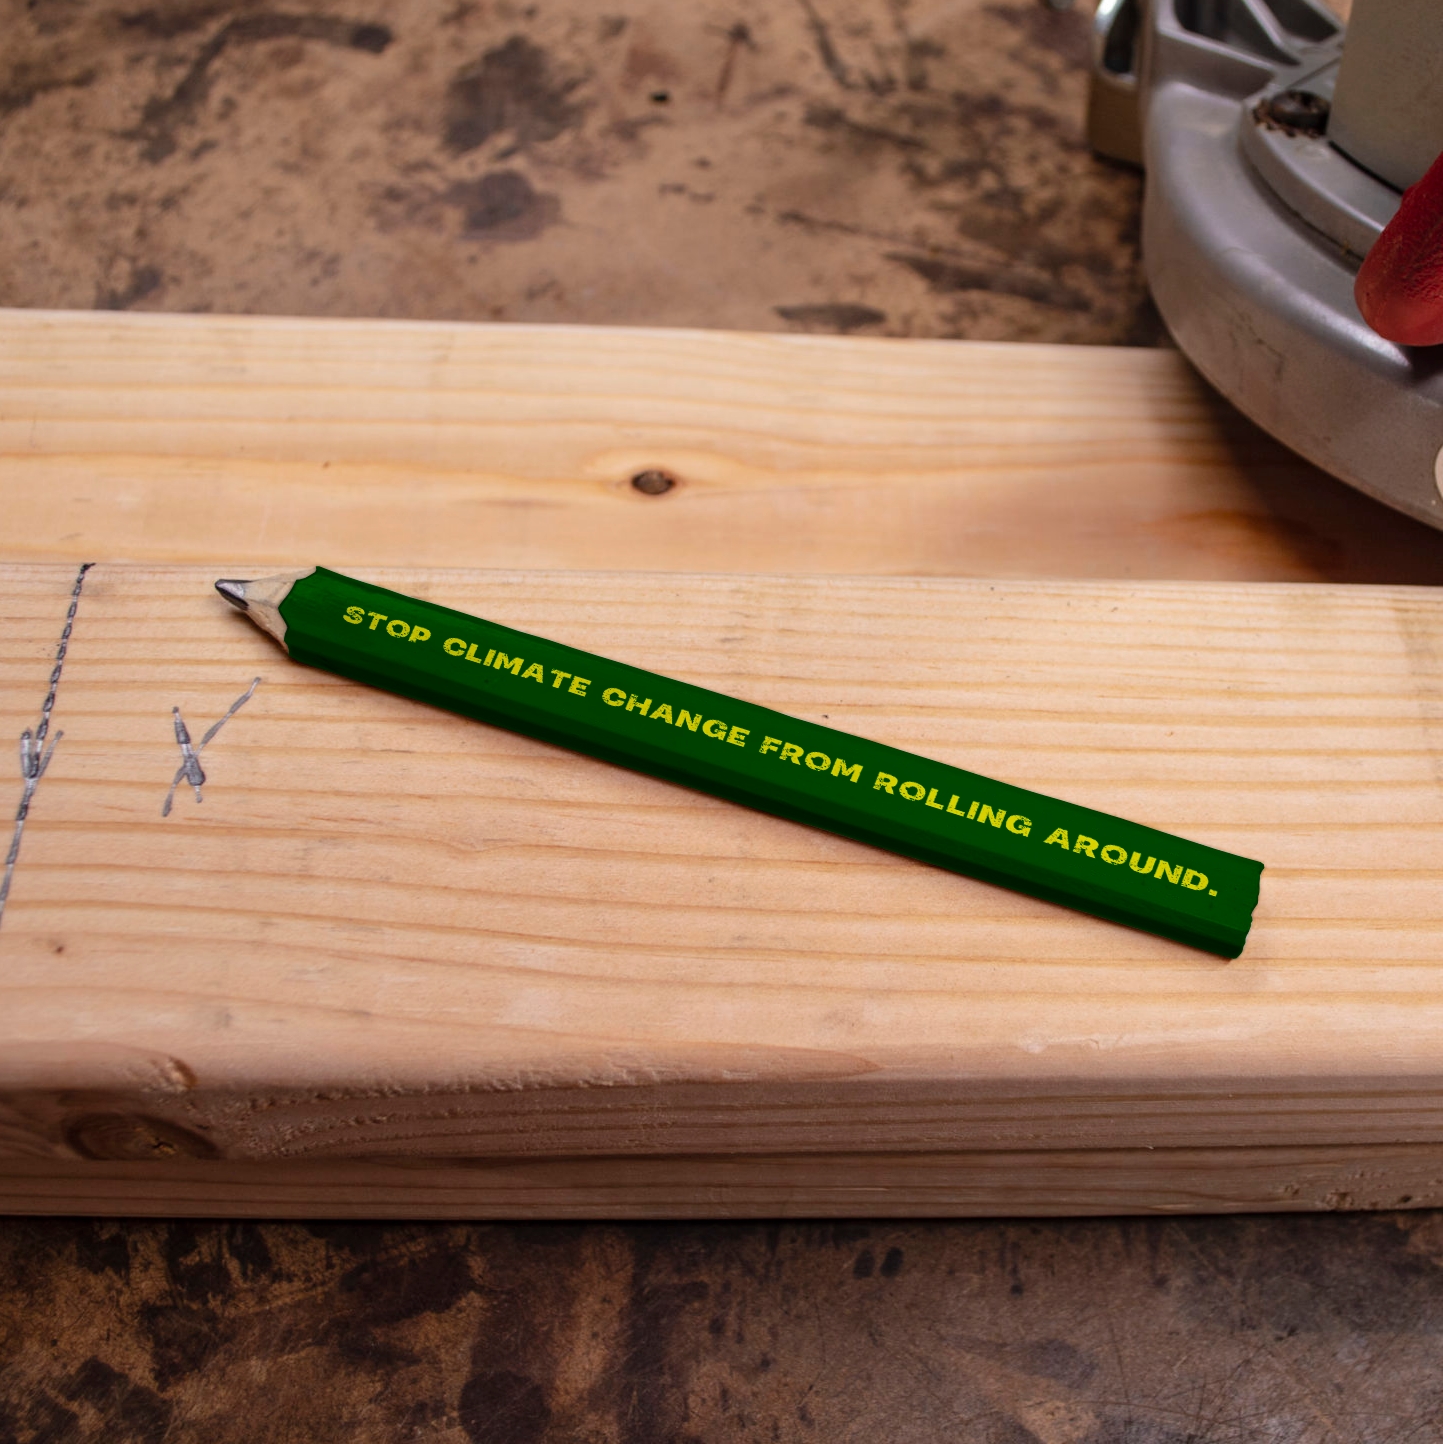 A carpenters pencil being used as a business card for Fair Trade, dark green pencil with yellow text on.